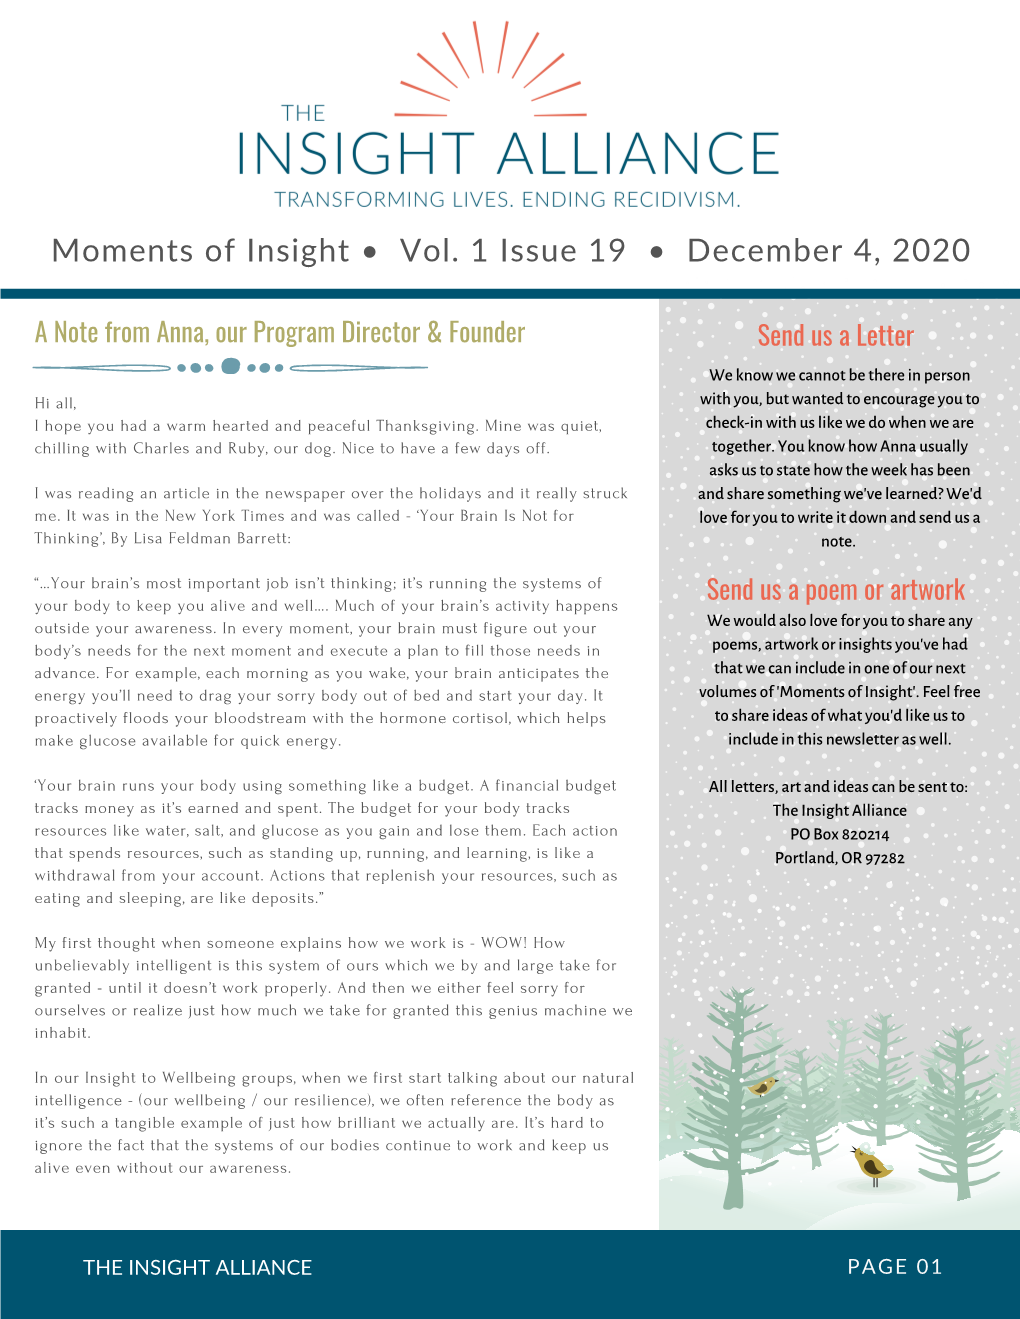 Moments of Insight, Volume 1, Issue 19